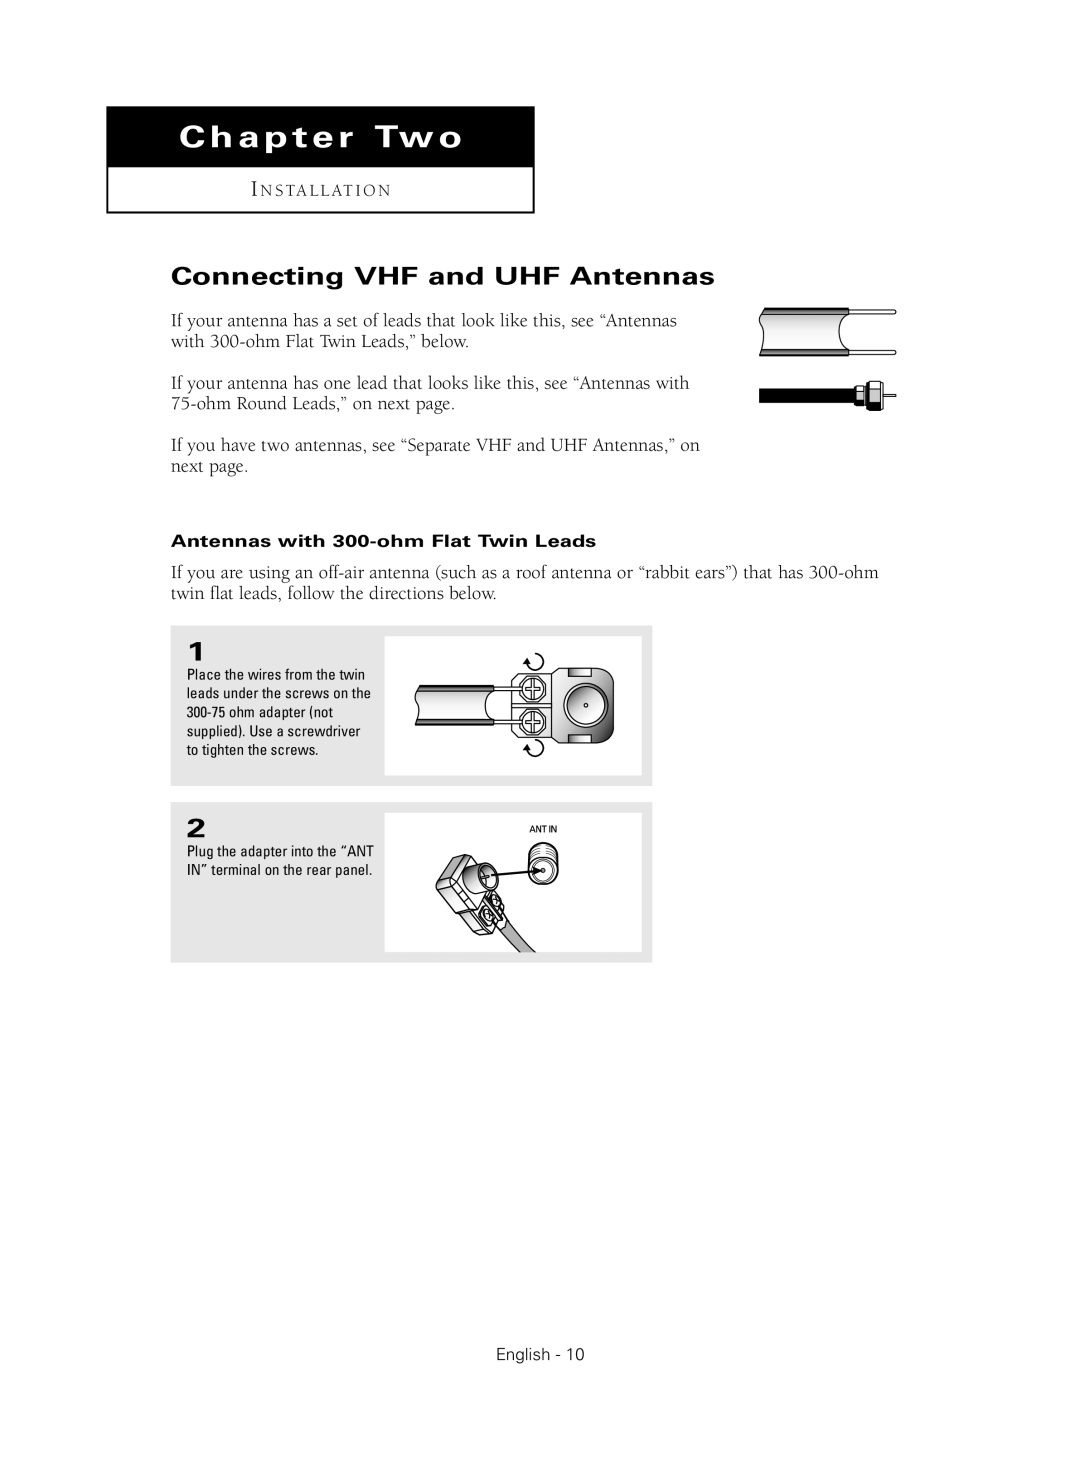 Samsung HC-P4241W manual Chapter Two, Connecting VHF and UHF Antennas 